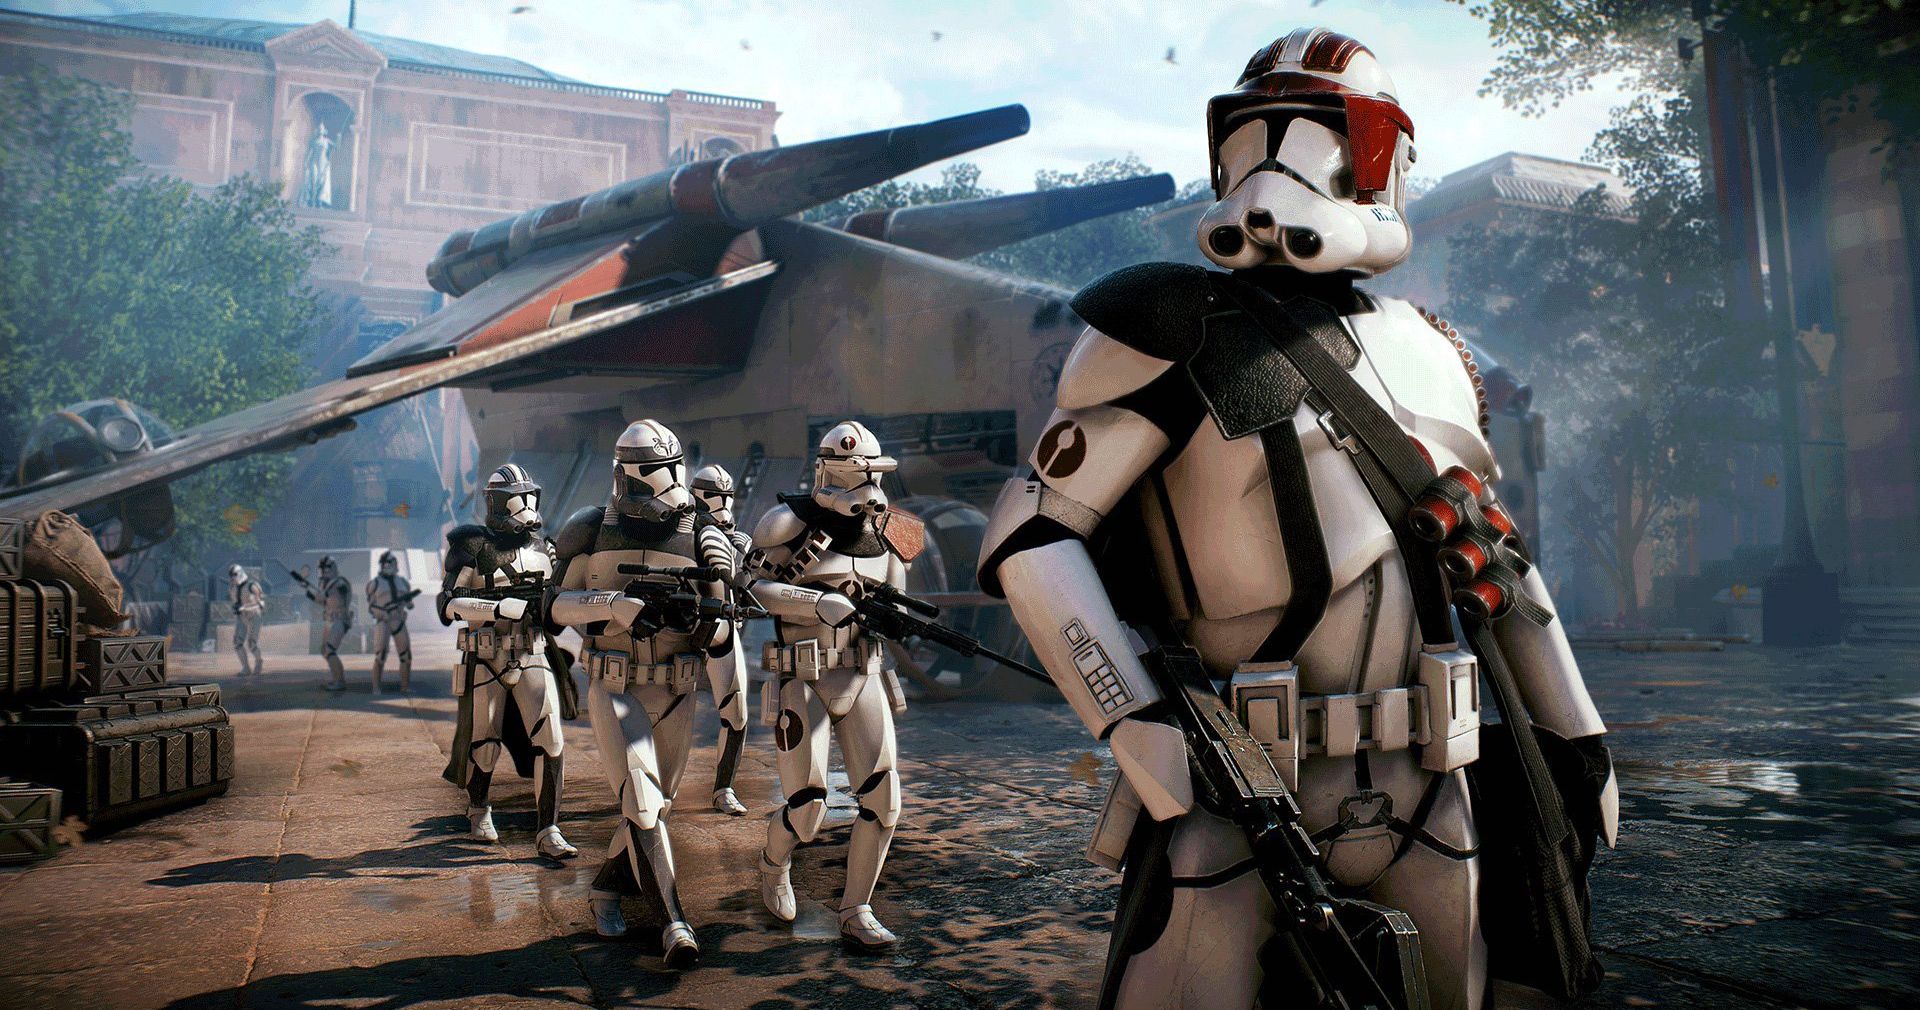 Star Wars Open-World Video Game Is Happening with Ubisoft and LucasFilm Games